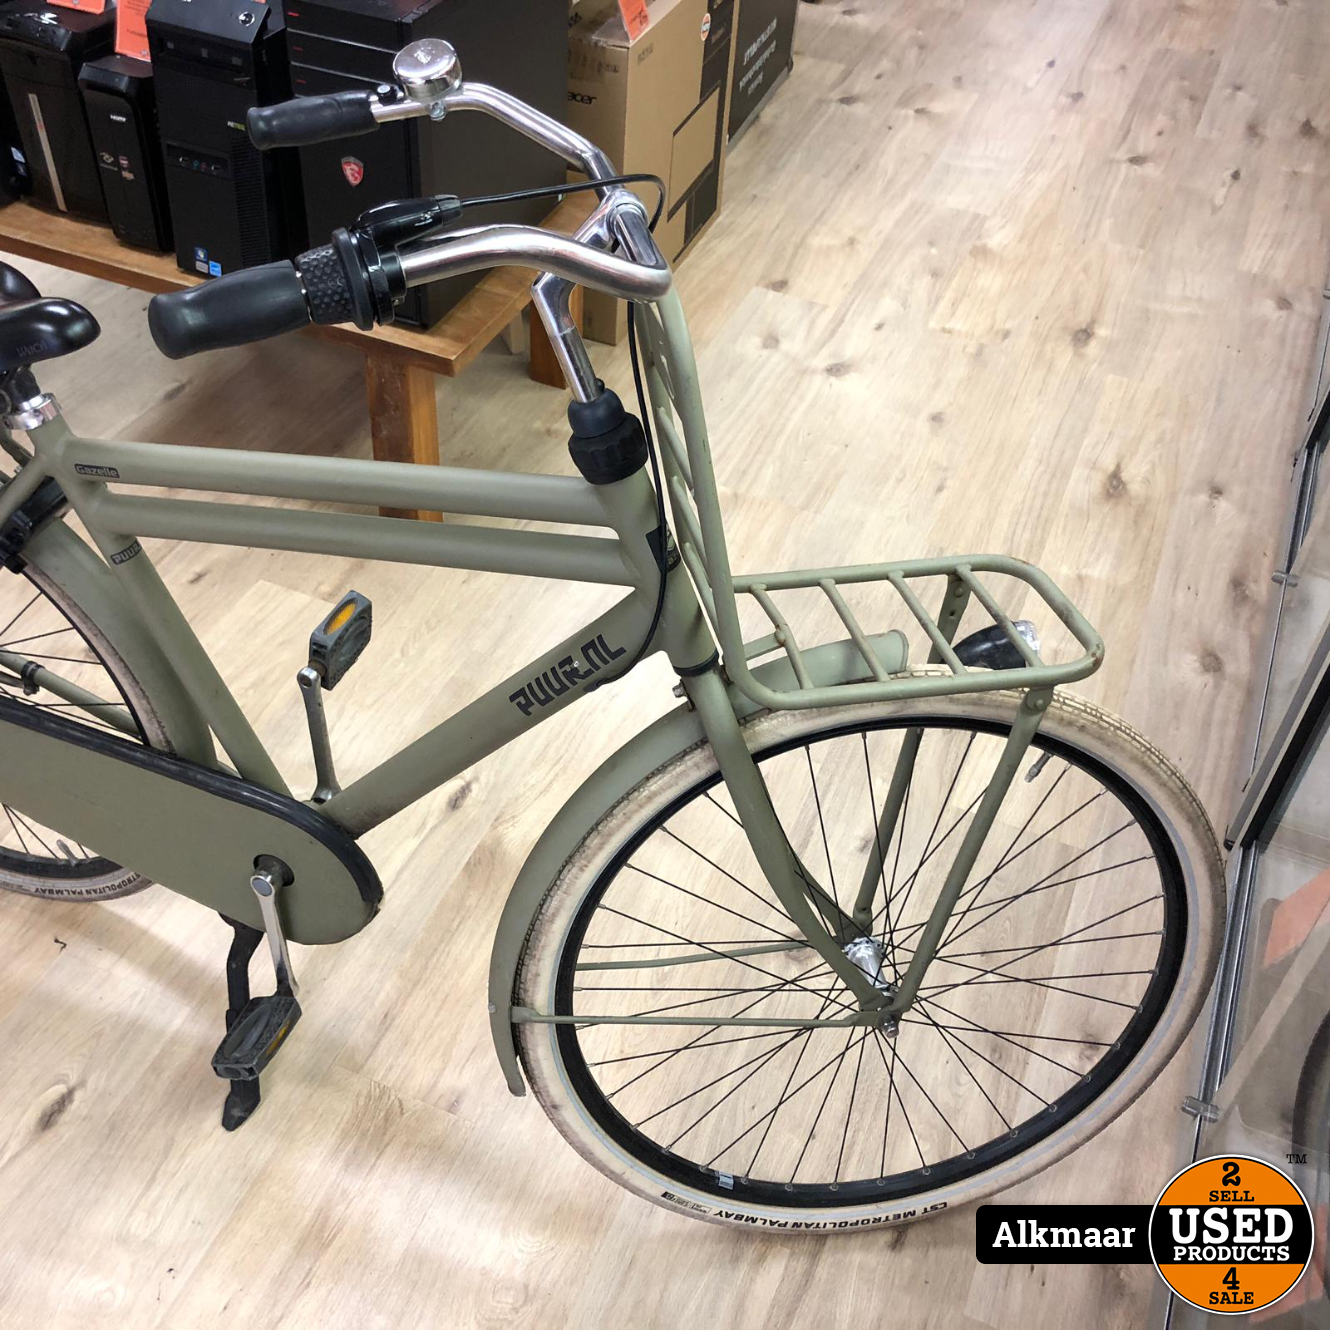 Gazelle Puur NL herenfiets groen transporter - Used Products